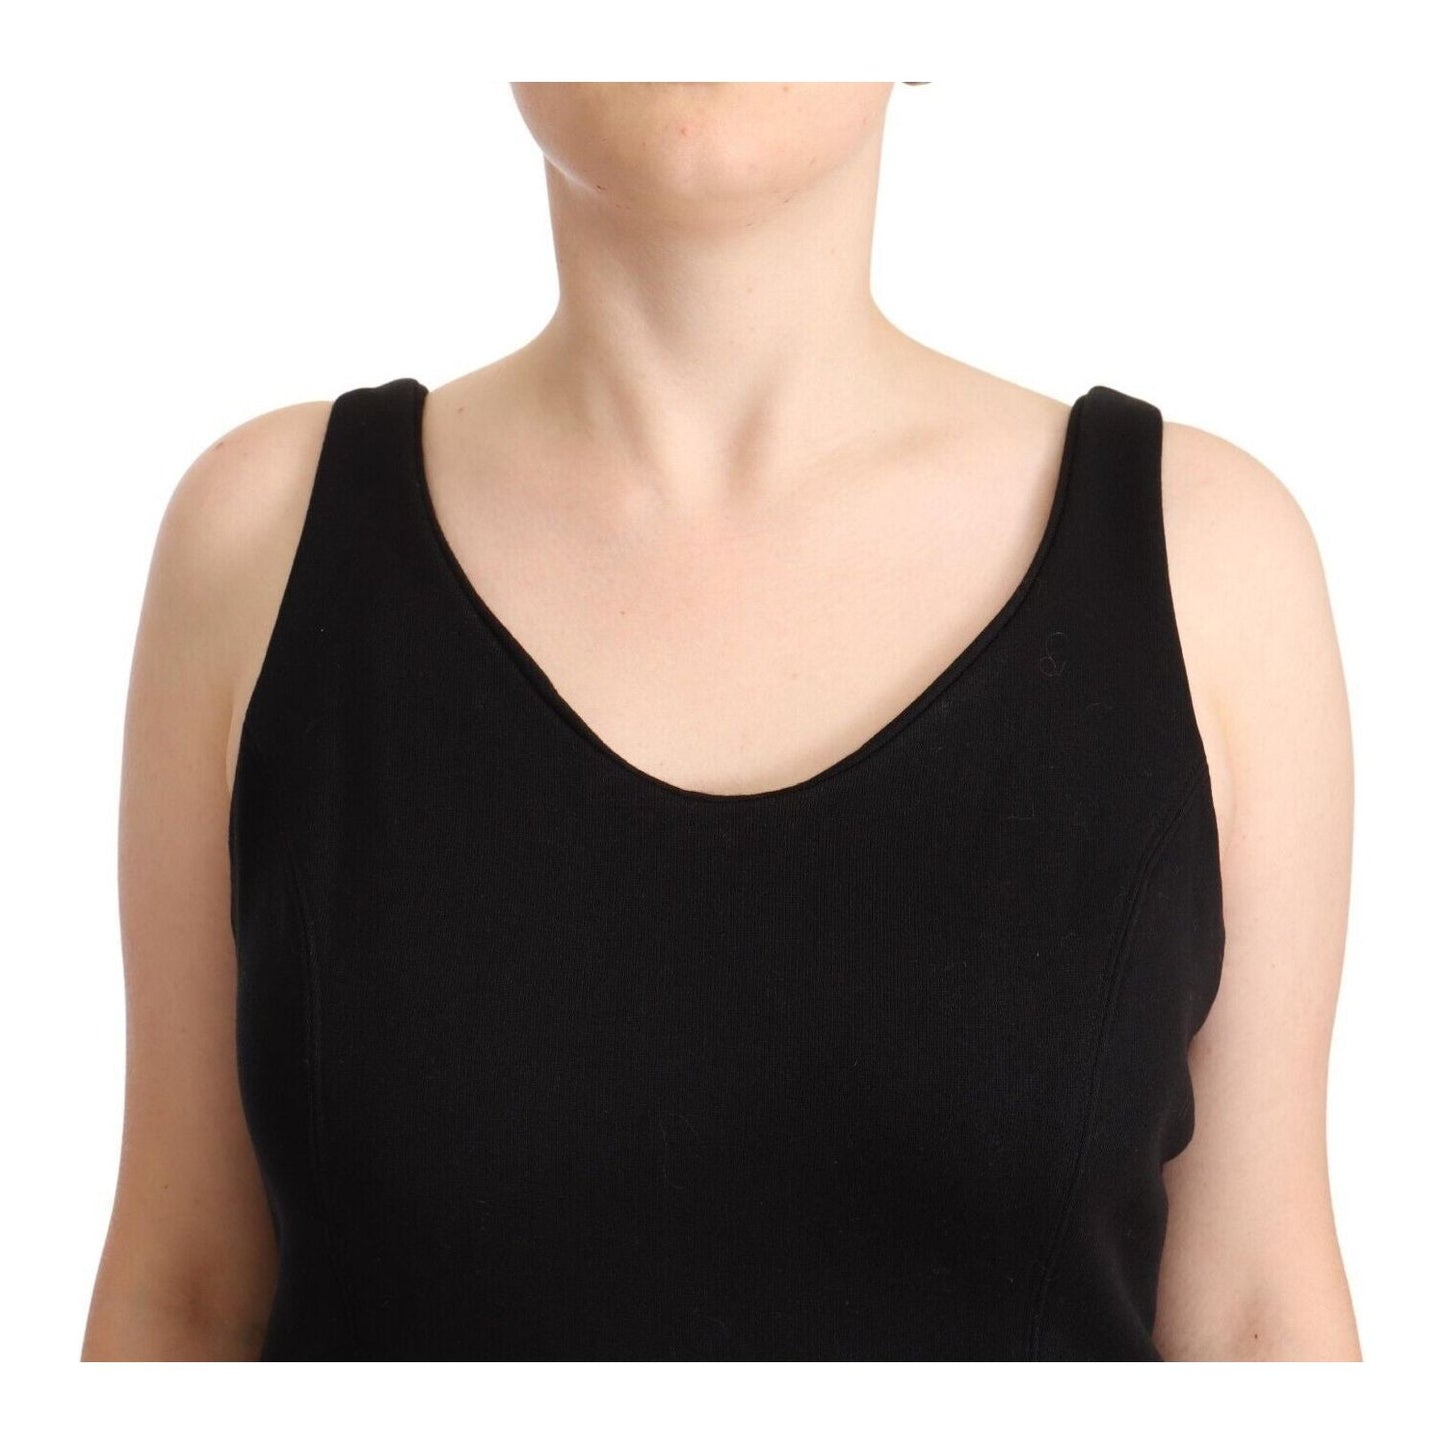 Ermanno Scervino Chic Sleeveless Designer Tank Top in Black WOMAN TOPS AND SHIRTS black-cotton-sleevelesss-tank-casual-top